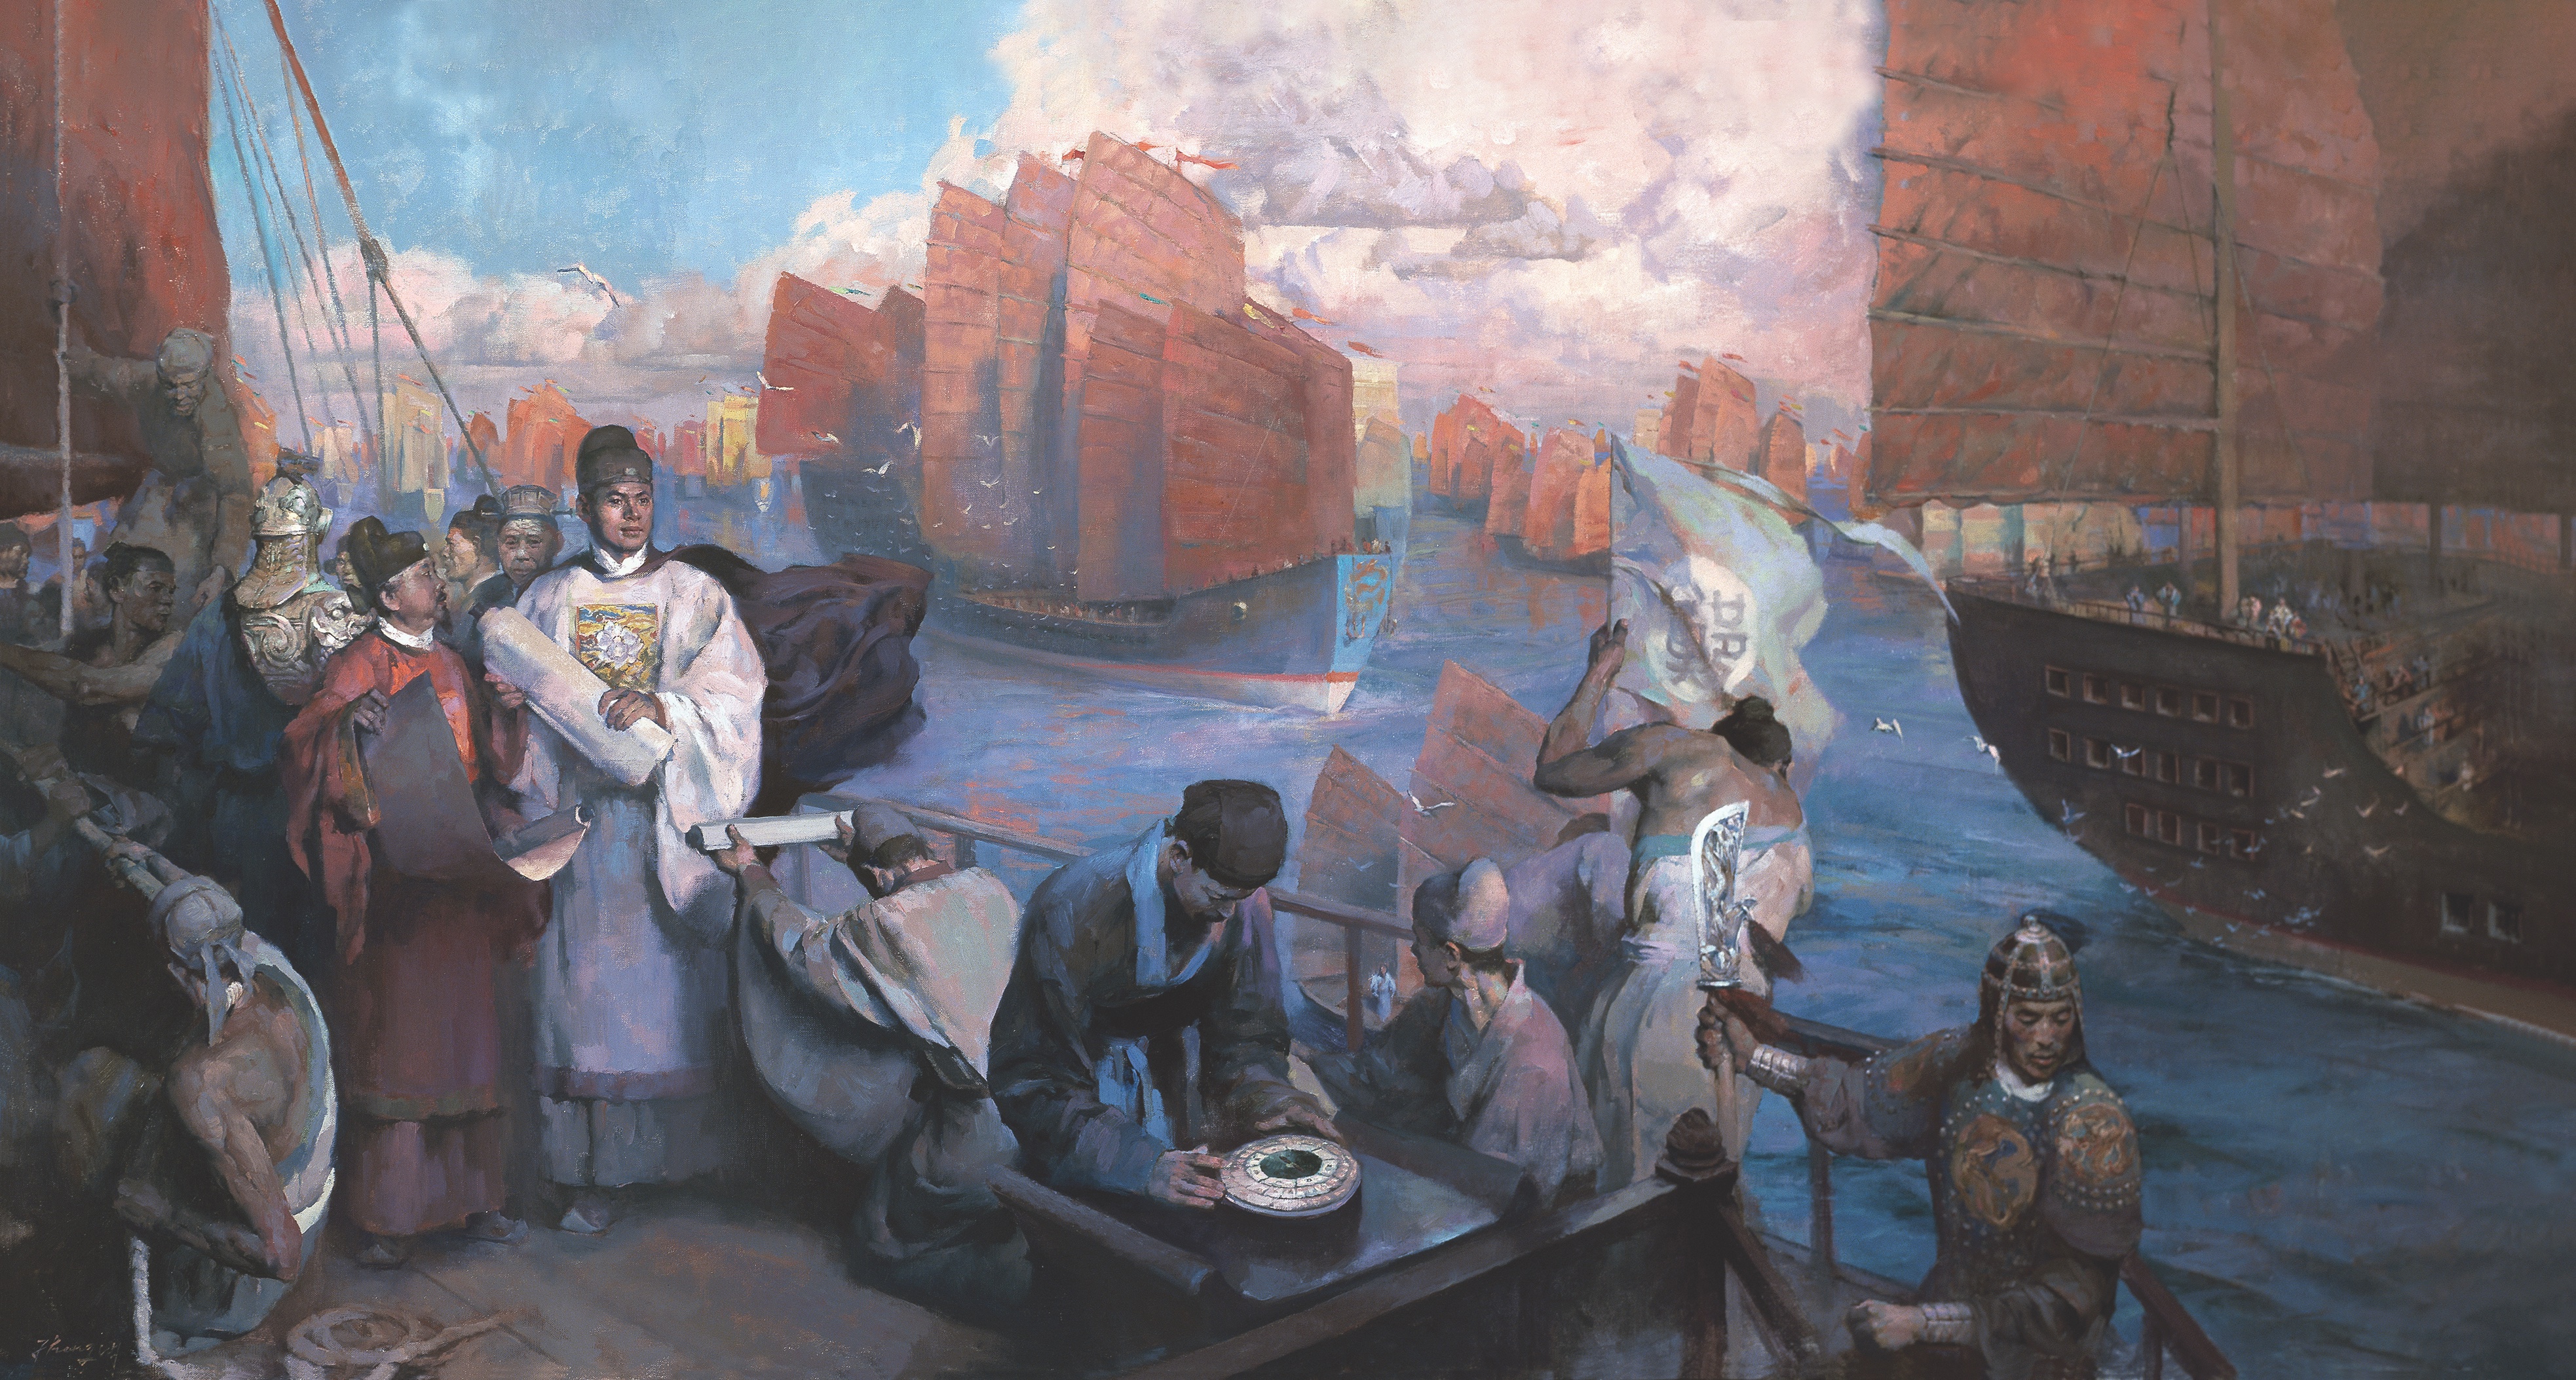 Zheng He once said that he and his sailors visited more than 30 countries over three decades “to manifest the transforming power of virtue and to treat distant people with kindness.” (China's Great Armada, Painted by Hongnian Zhang)